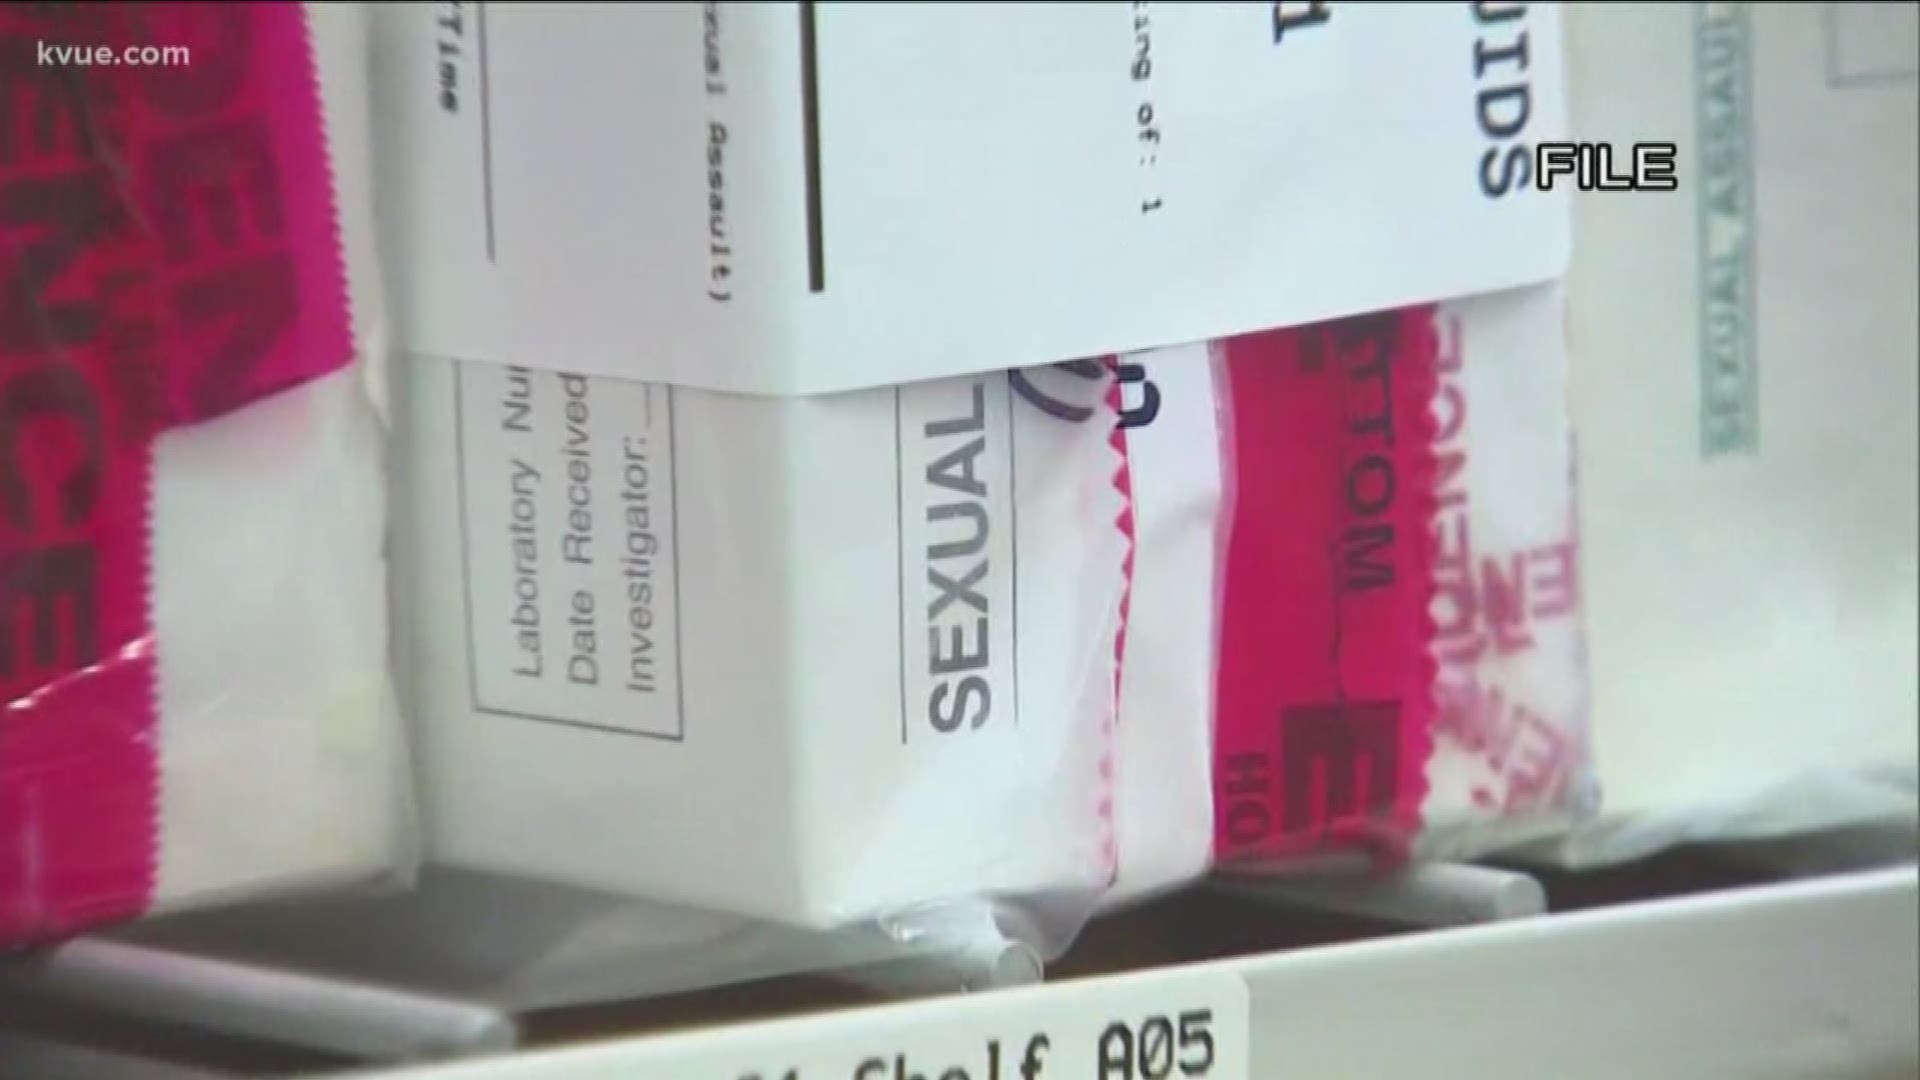 Austin police say the backlog of untested rape kits is now cleared. After getting the results from the tests, they're now reopening hundreds of cases.